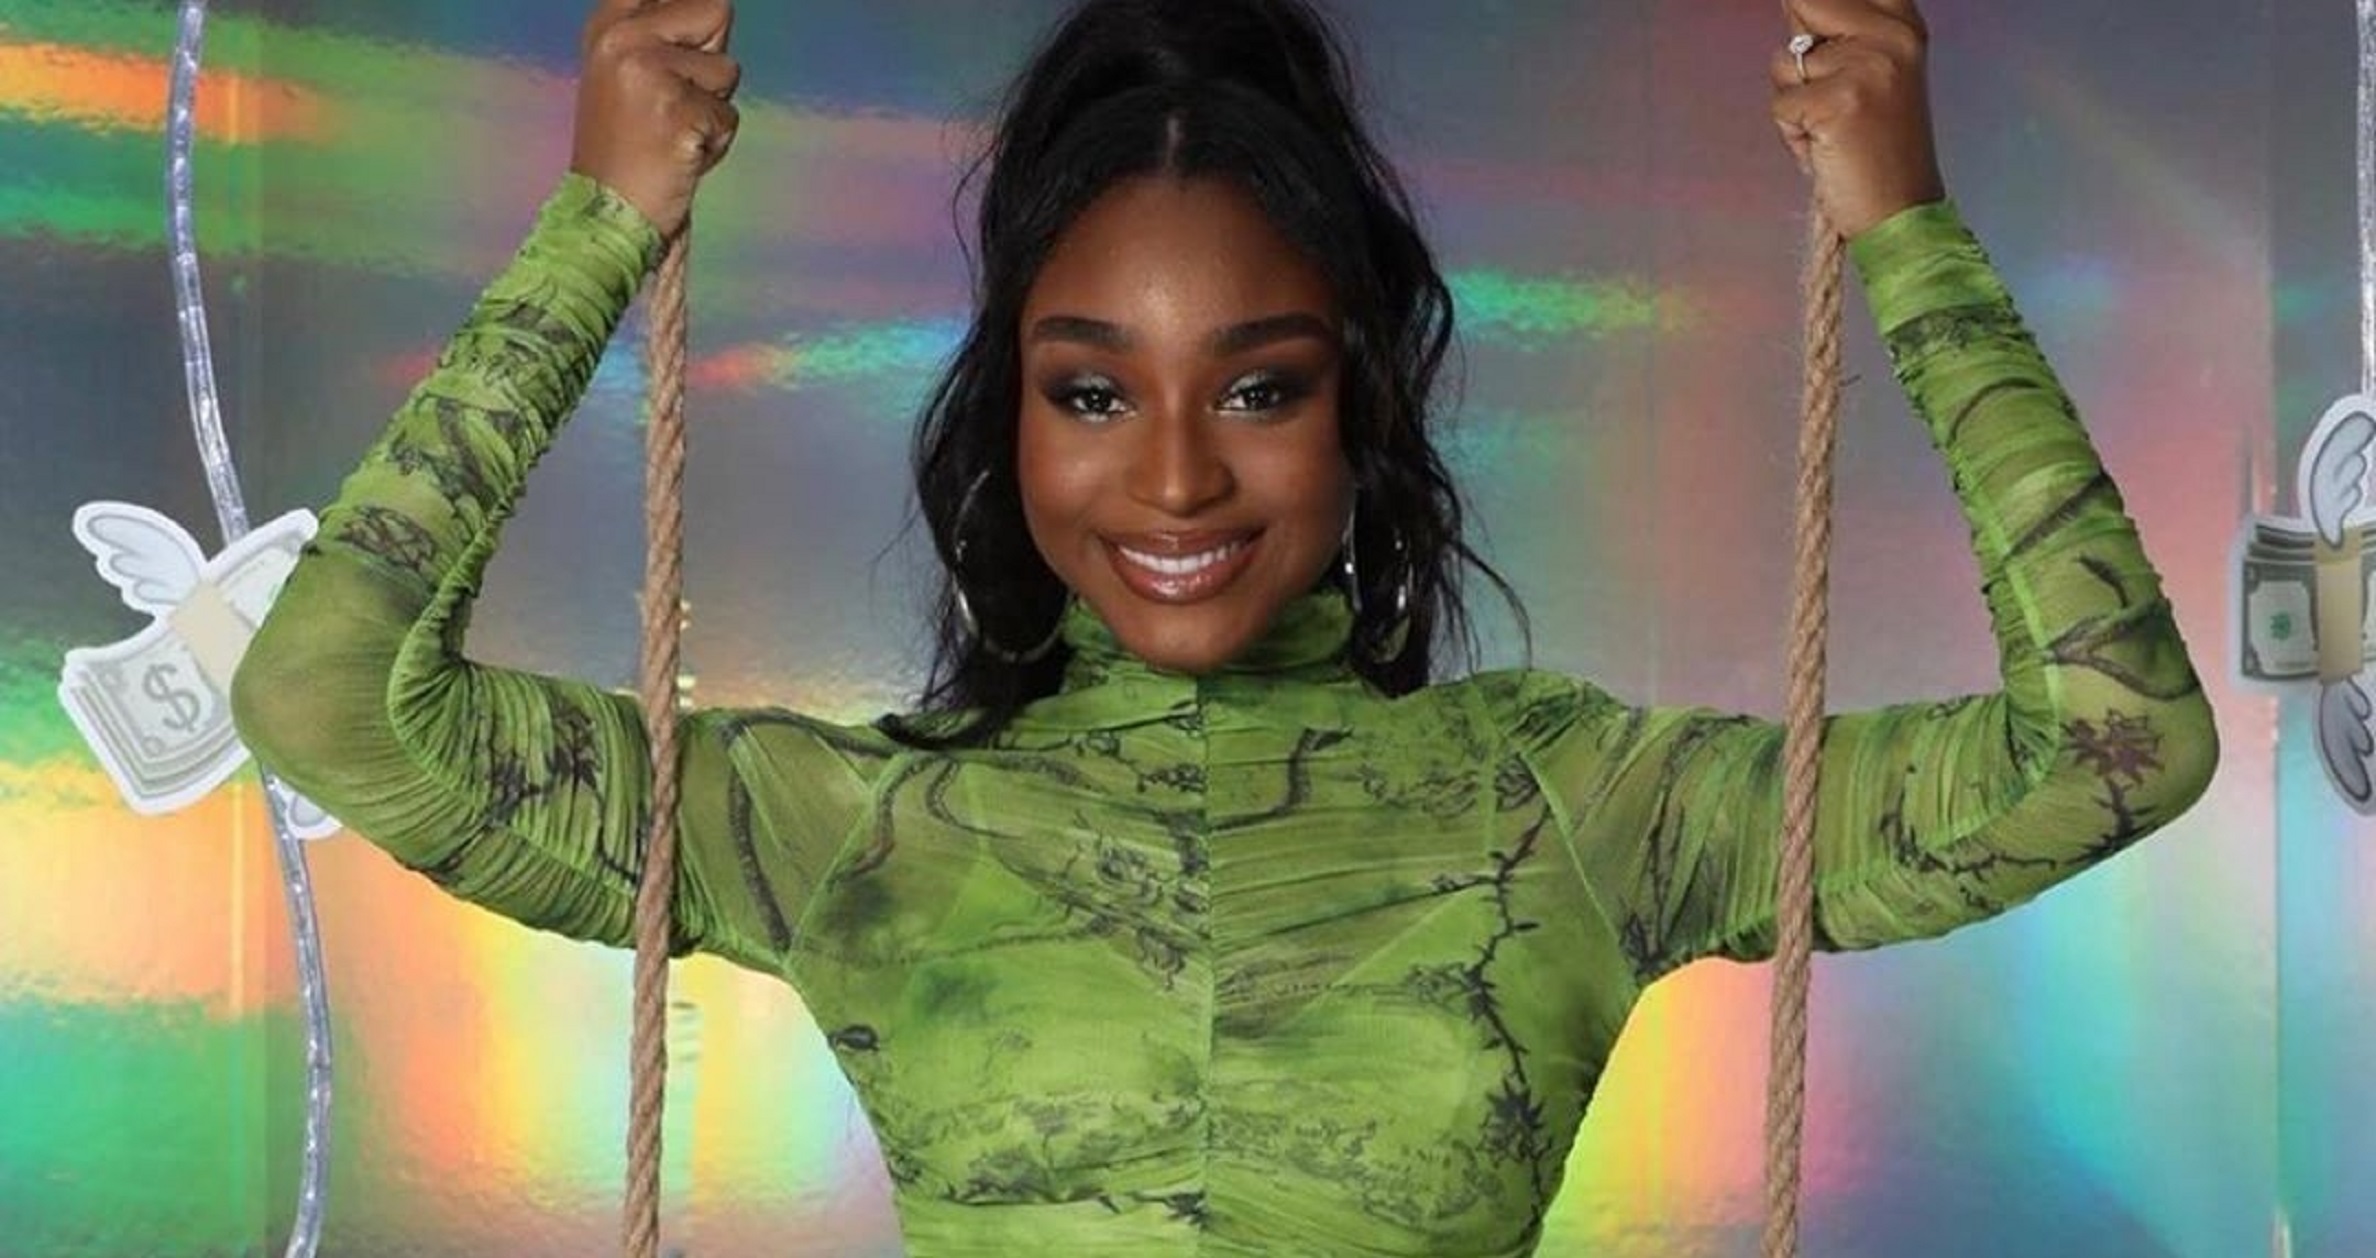 Watch: Normani Belts Out Acoustic Version of ‘Motivation’